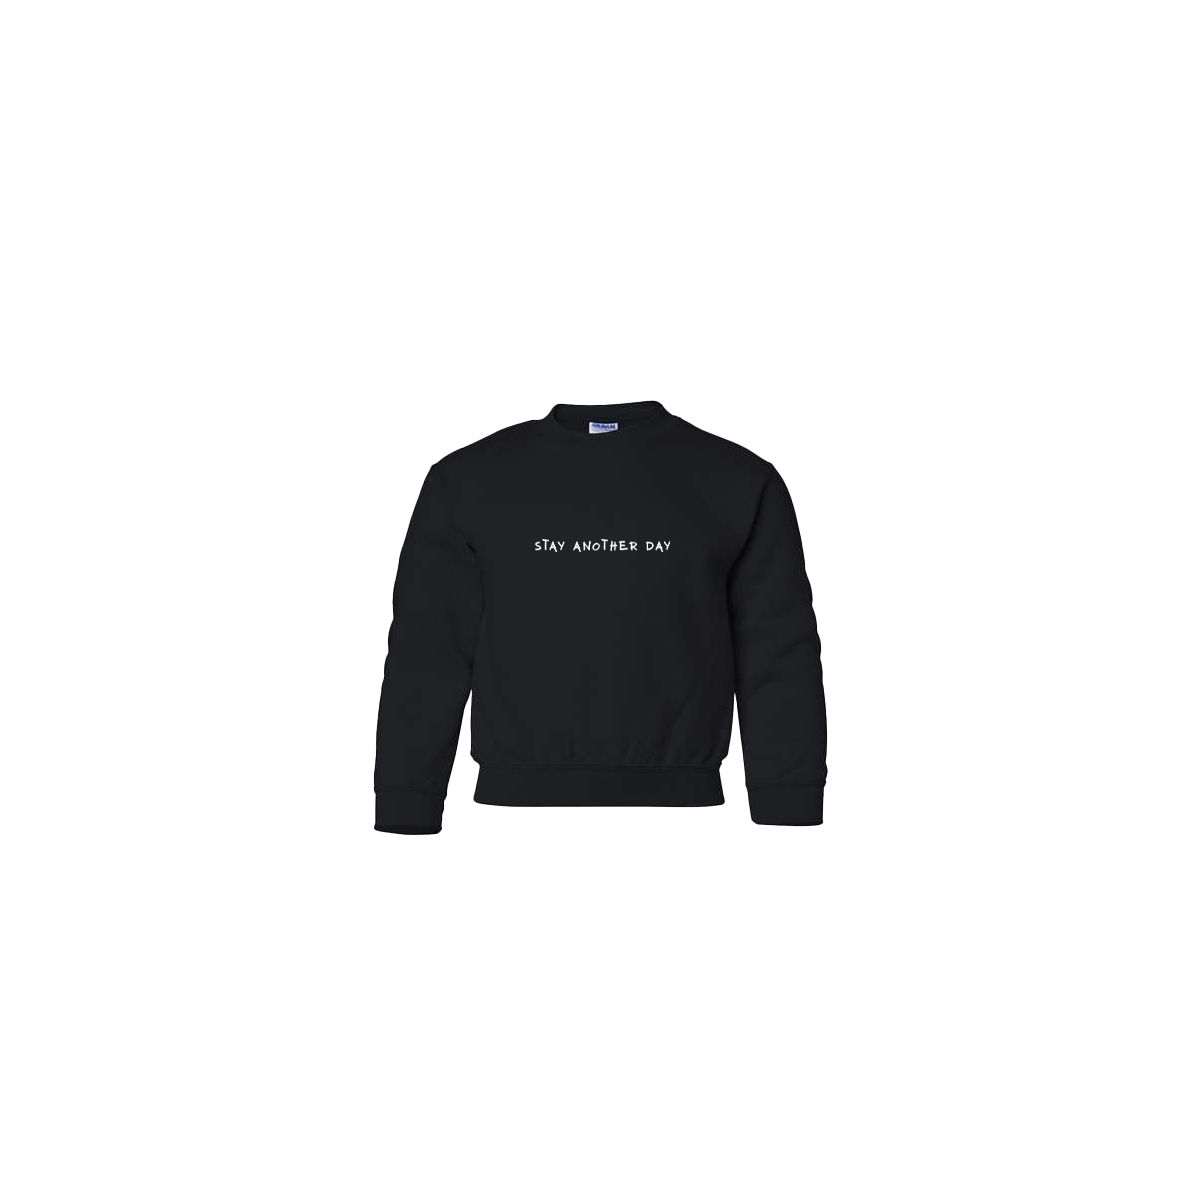 Stay Another Day Text Embroidered Black Youth Crewneck